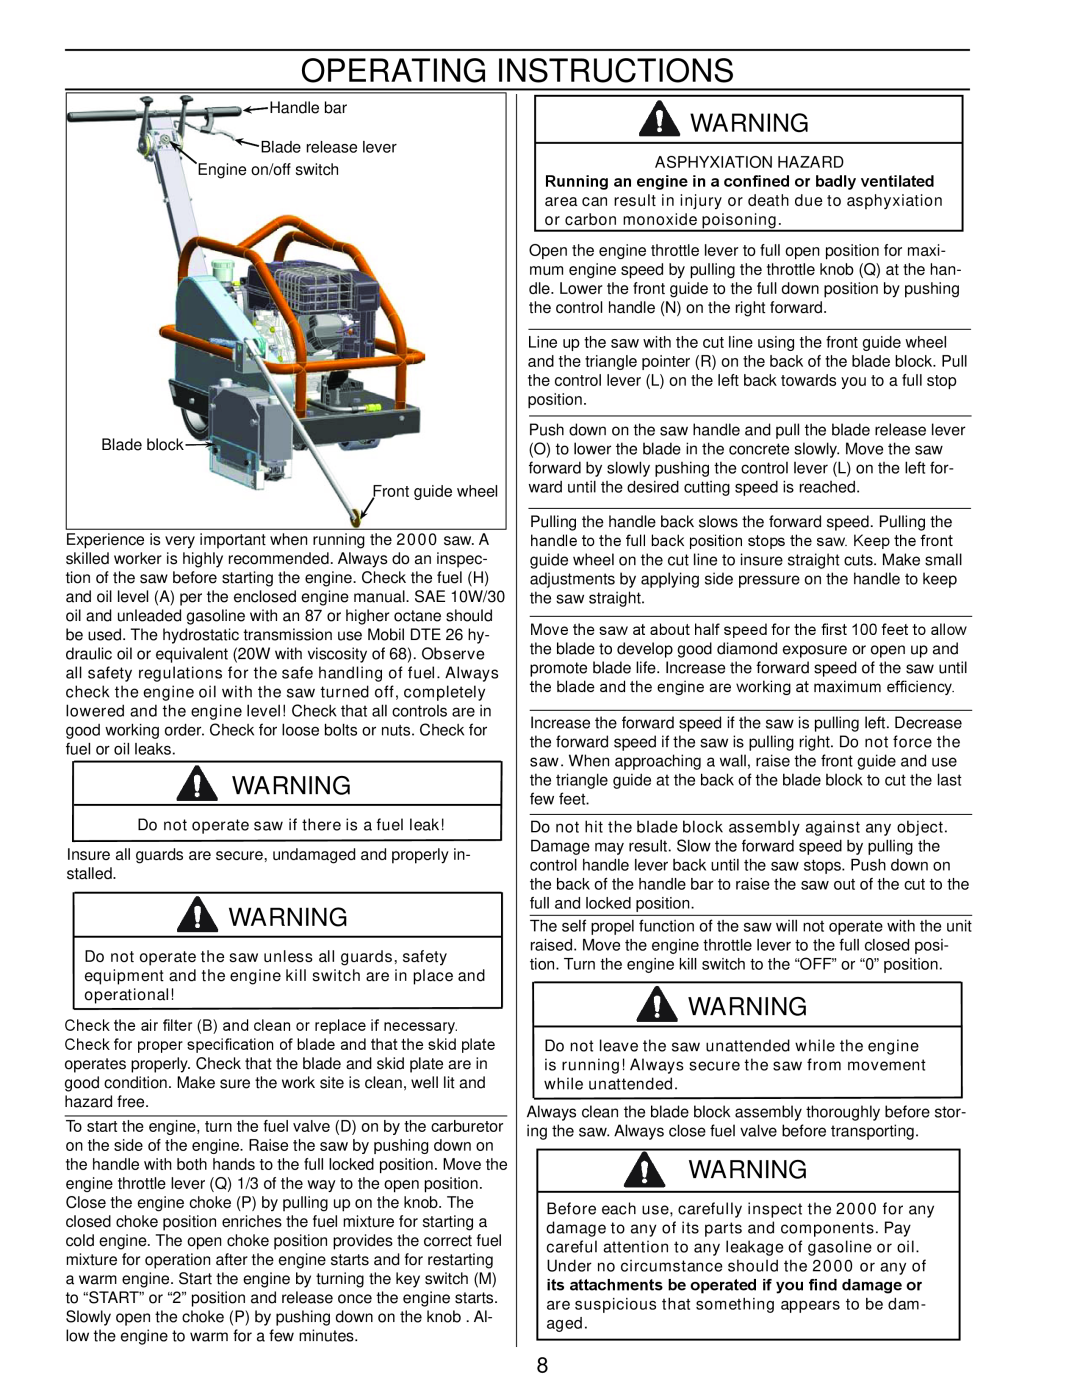 Husqvarna 2000 manual Operating Instructions, Do not operate saw if there is a fuel leak 